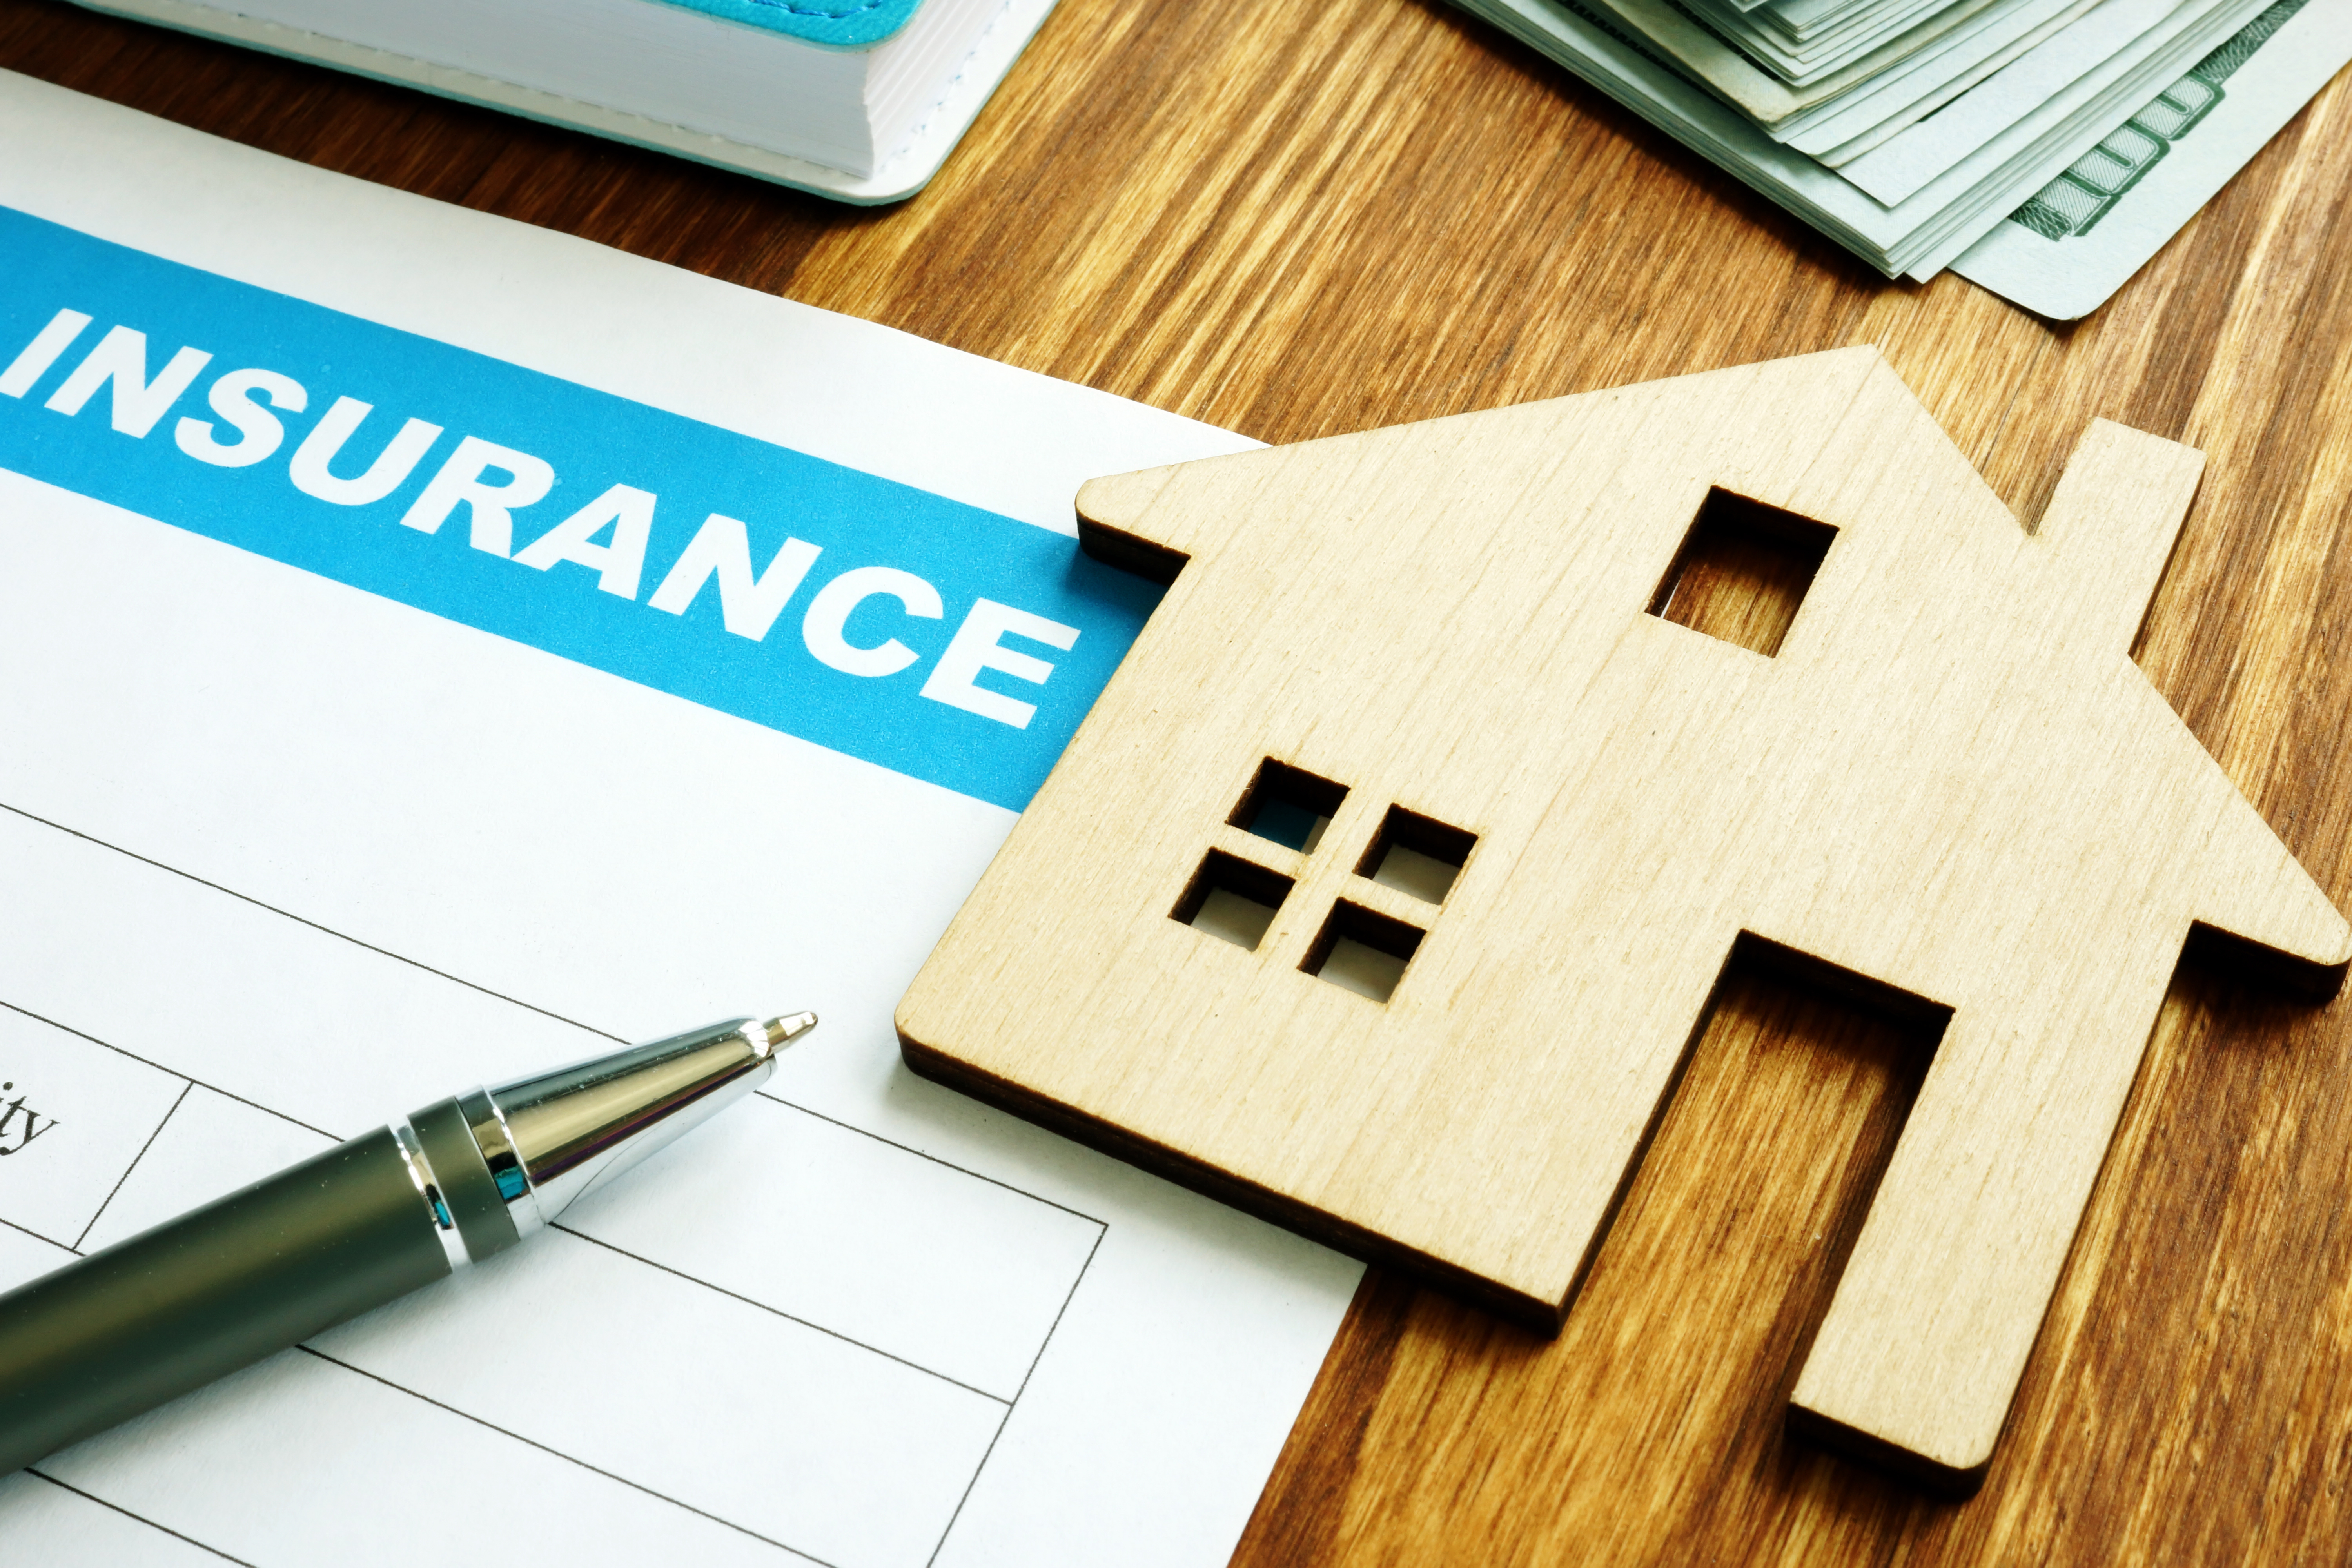 What Types of Damage Does Homeowners’ Insurance Cover?